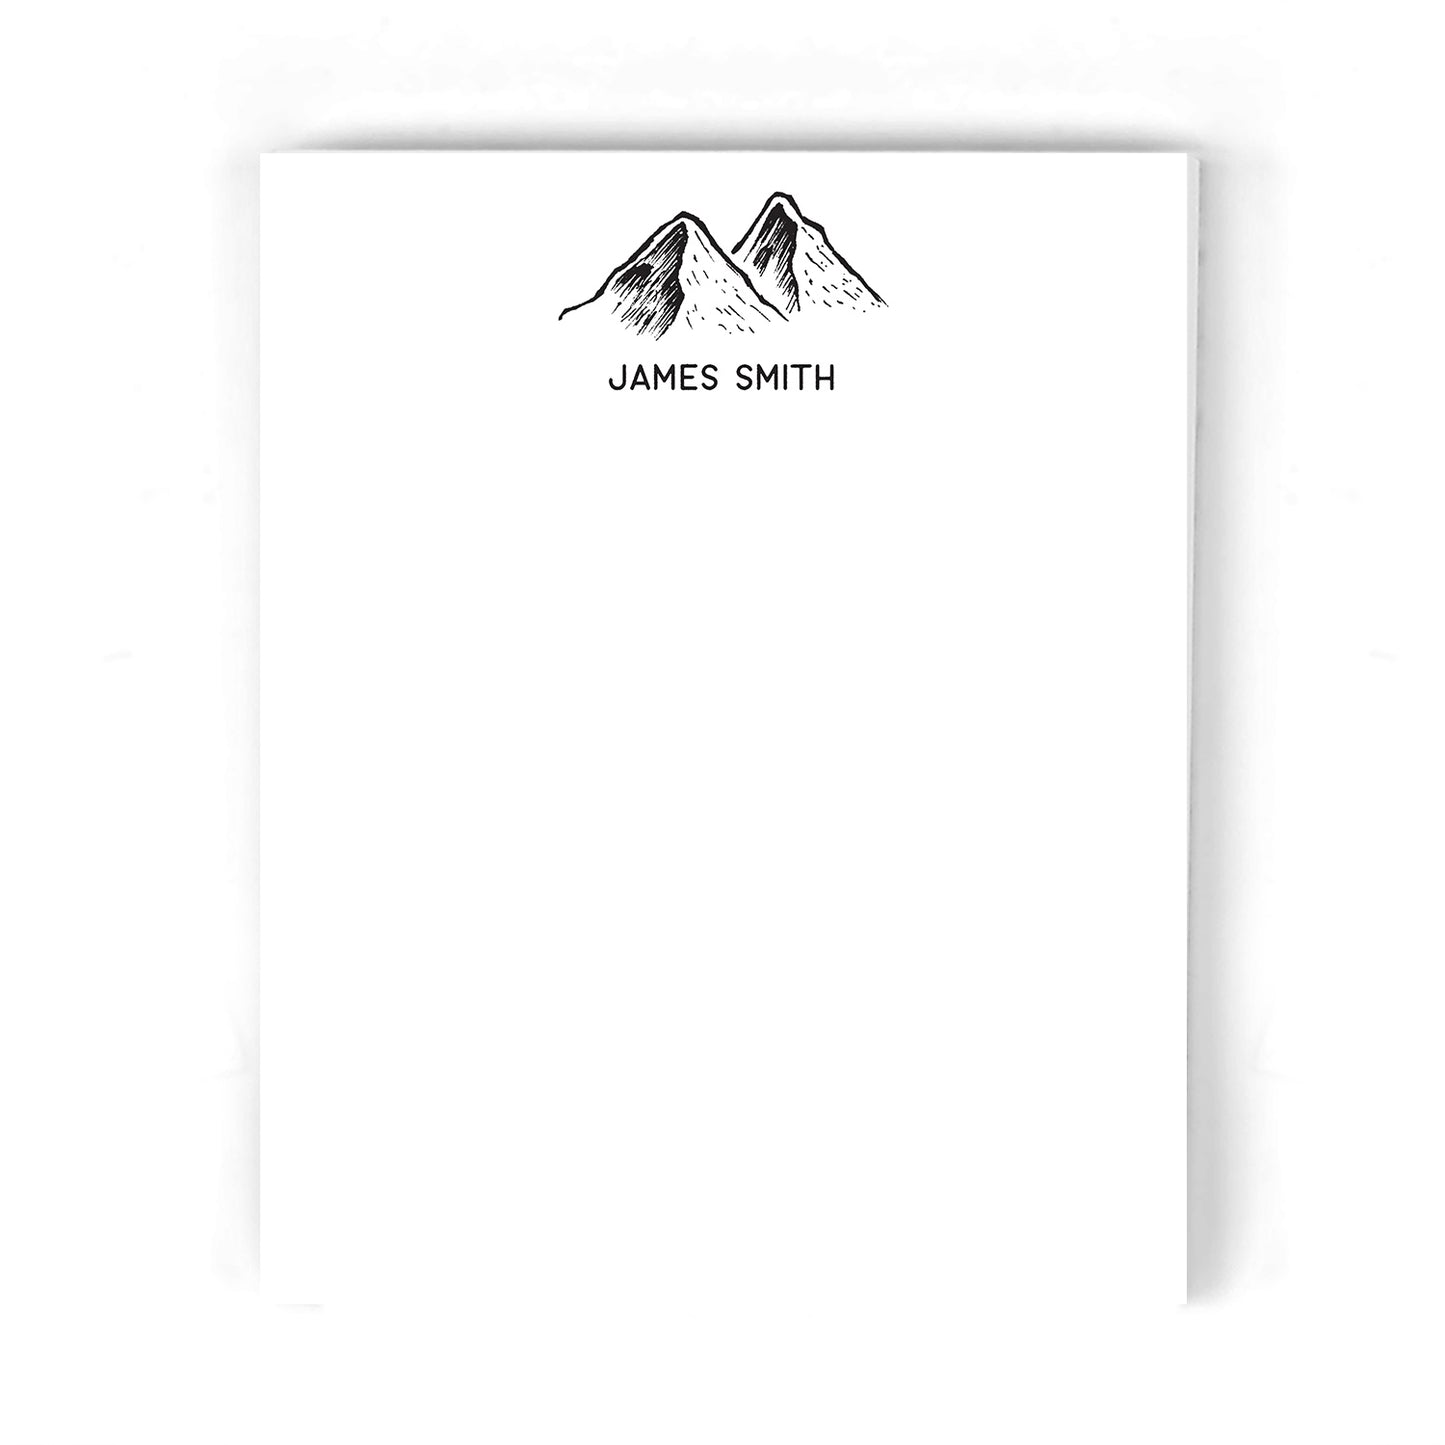 Rustic Mountain Notepad